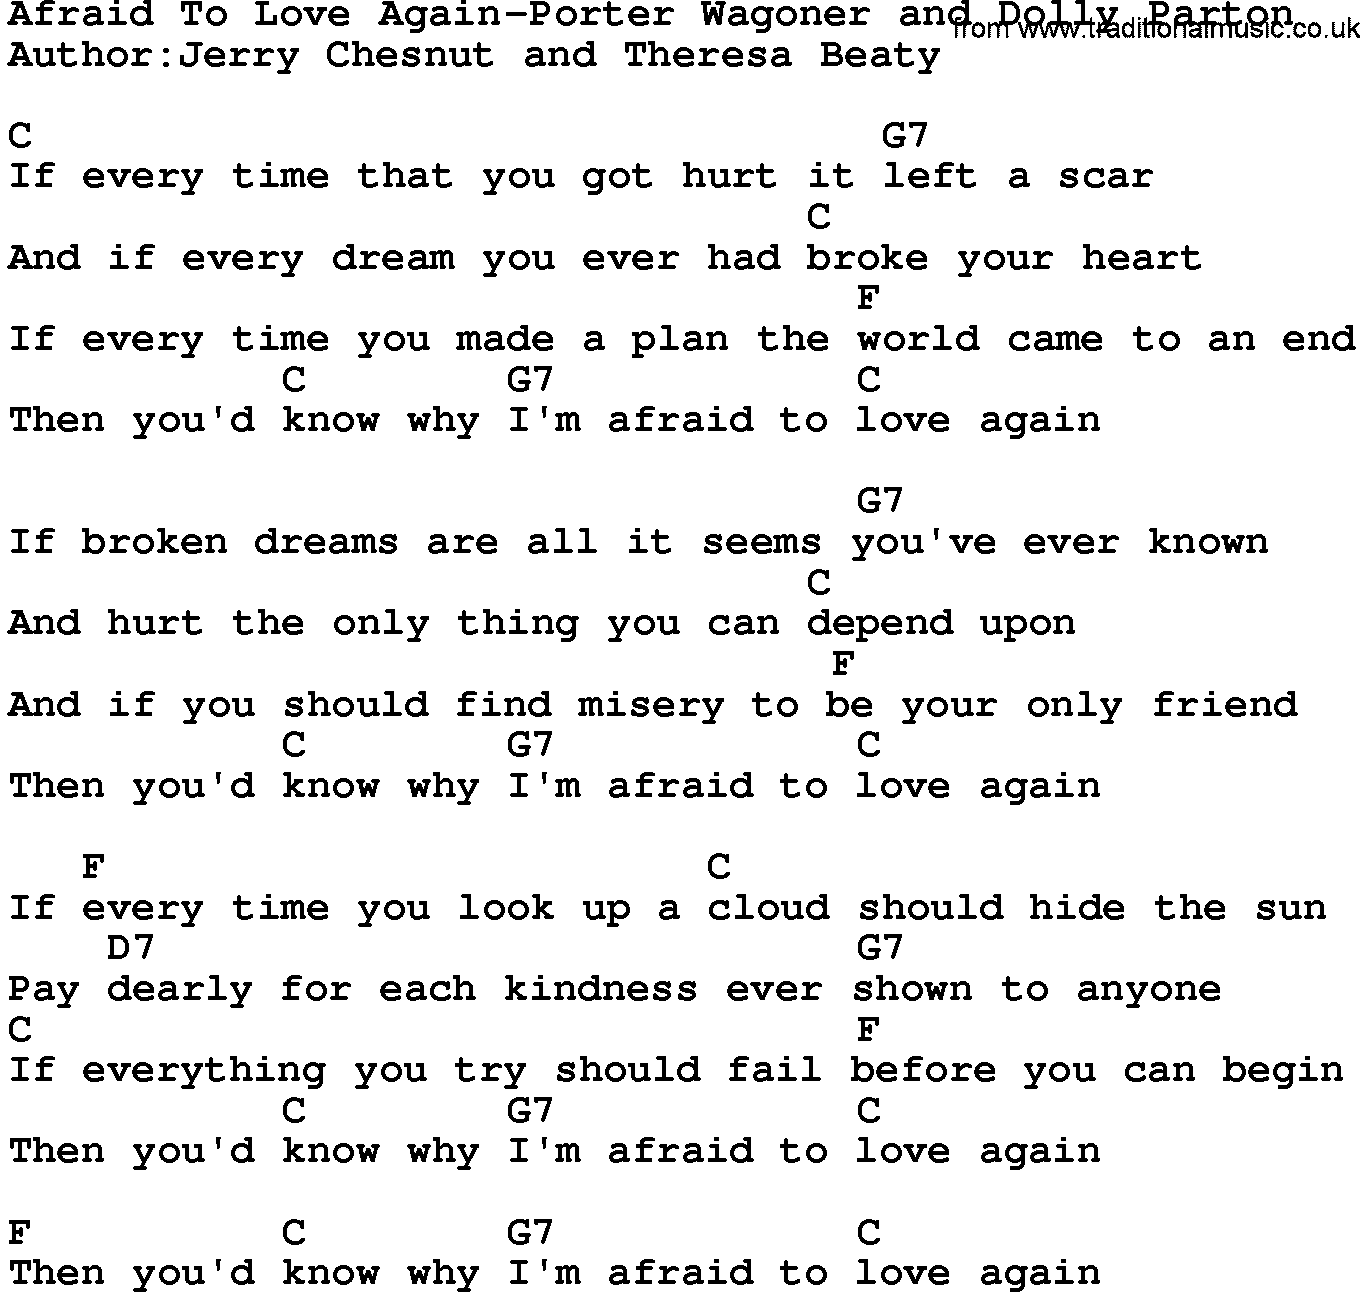 Country music song: Afraid To Love Again-Porter Wagoner And Dolly Parton lyrics and chords